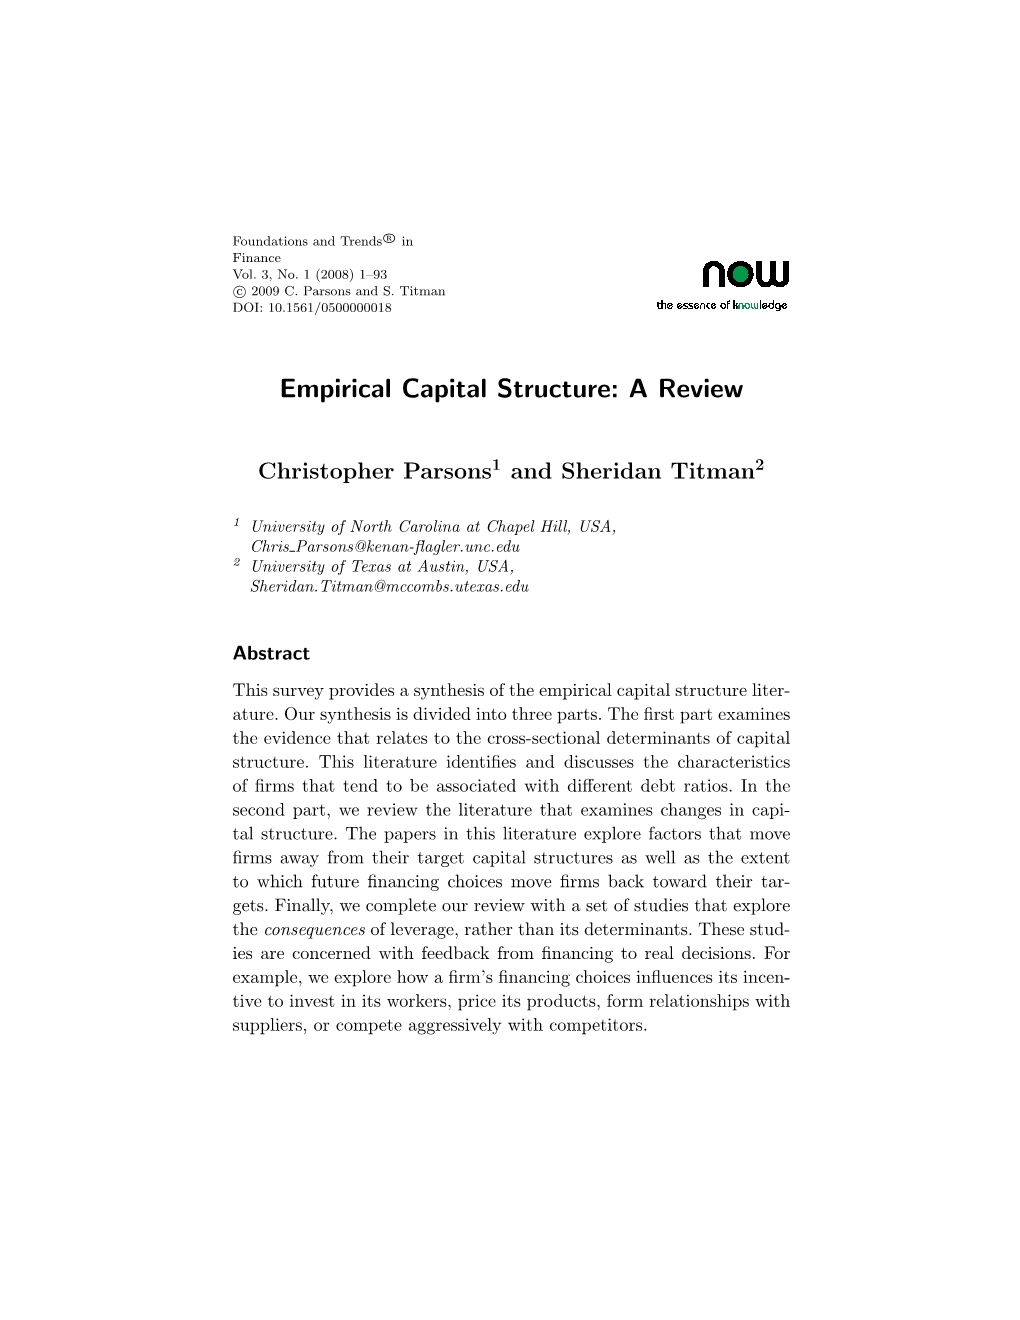 Empirical Capital Structure: a Review